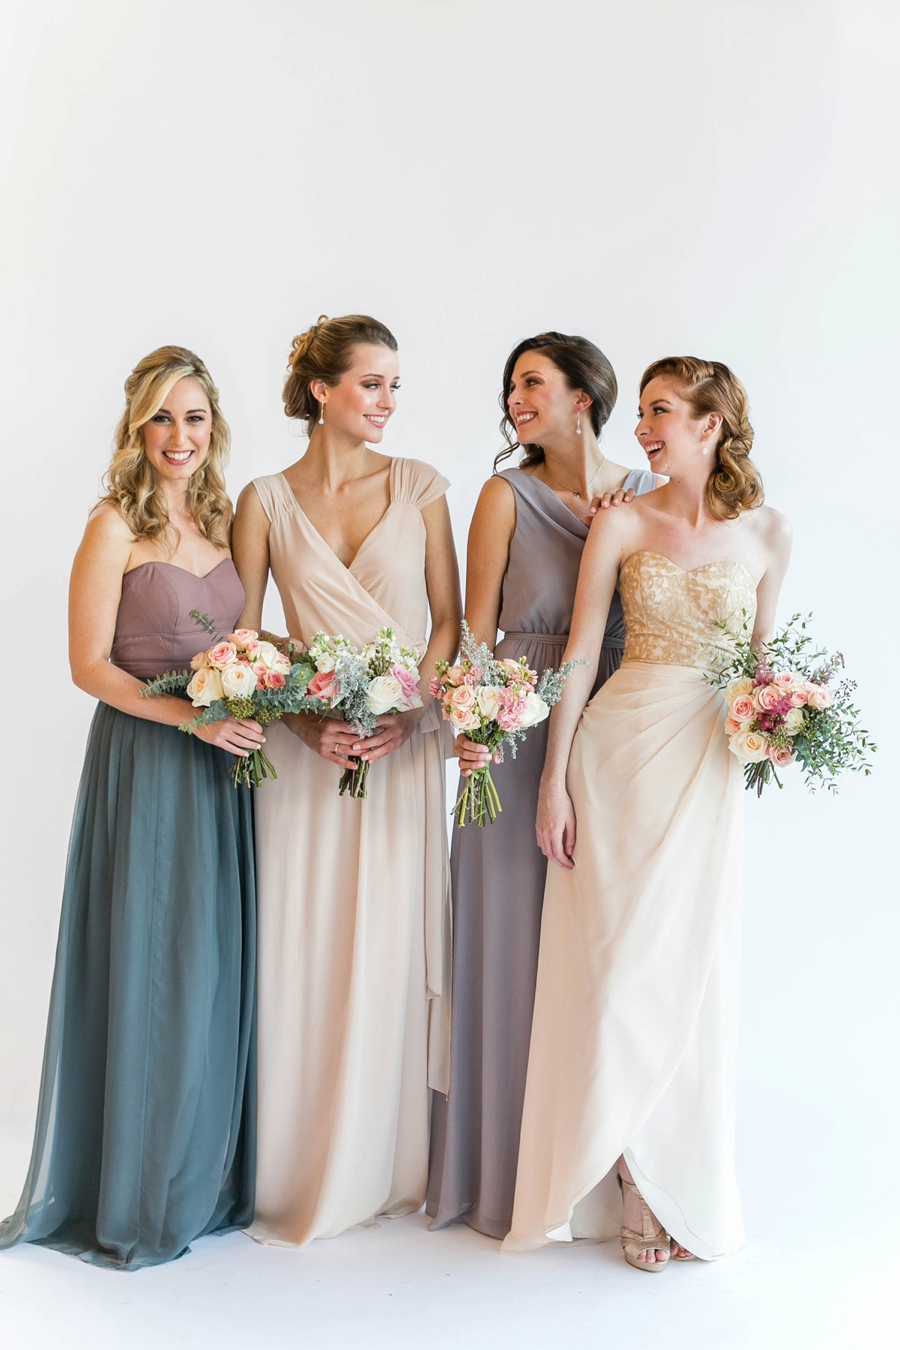 Mix and Match Bridesmaid Dresses From Brideside | Every Last Detail